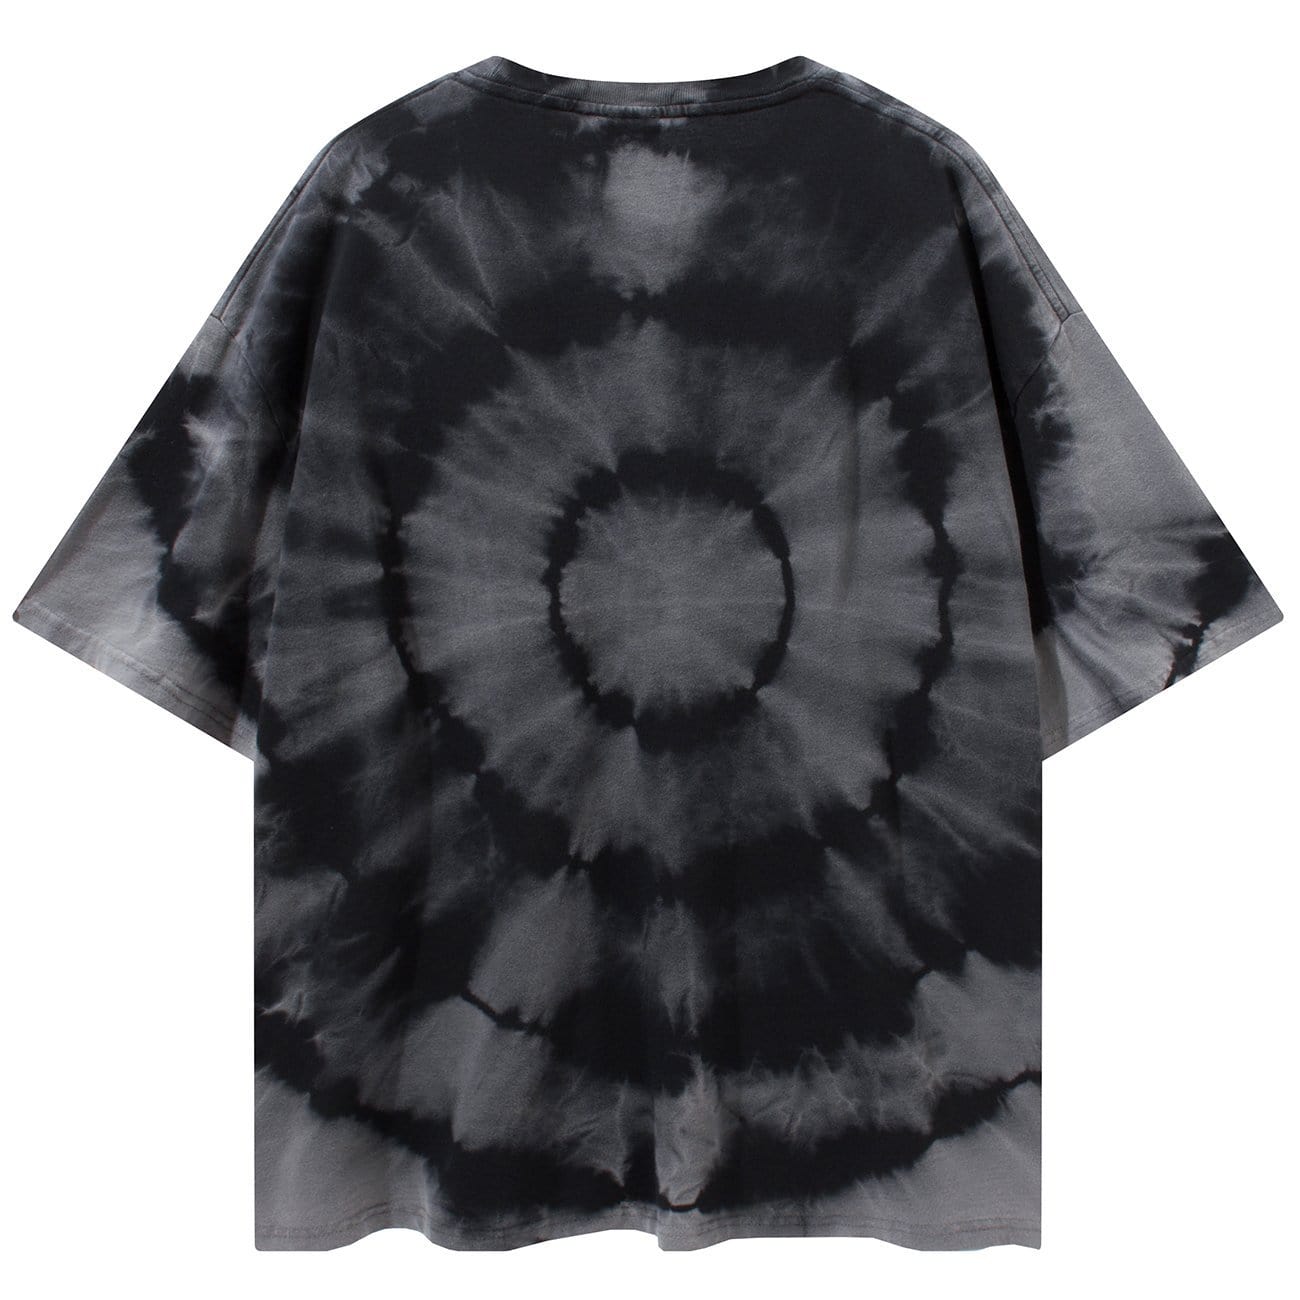 TO Disc Special Effects Tie Dye Washed Tee